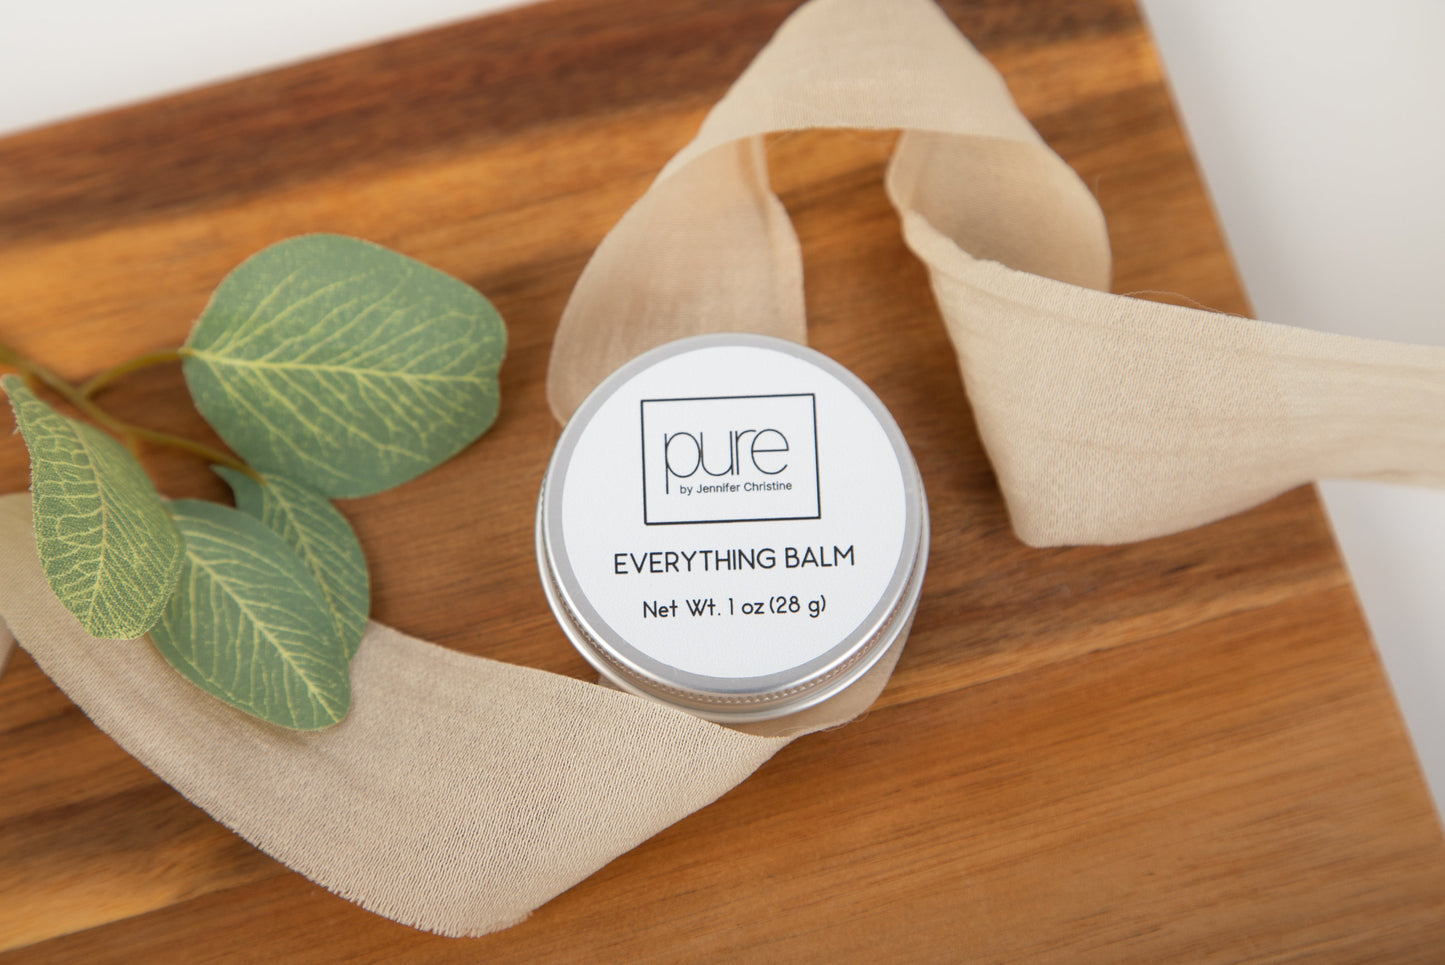 Our Everything Balm synergistically works by bringing herbal nutrients from Calendula and Chamomile and healing properties from pure Essential Oils and bringing them together to create the perfect balm to promote healing of your skin. Apply to scrapes, dry skin and rashes to help soothe, calm and promote healing of your skin.